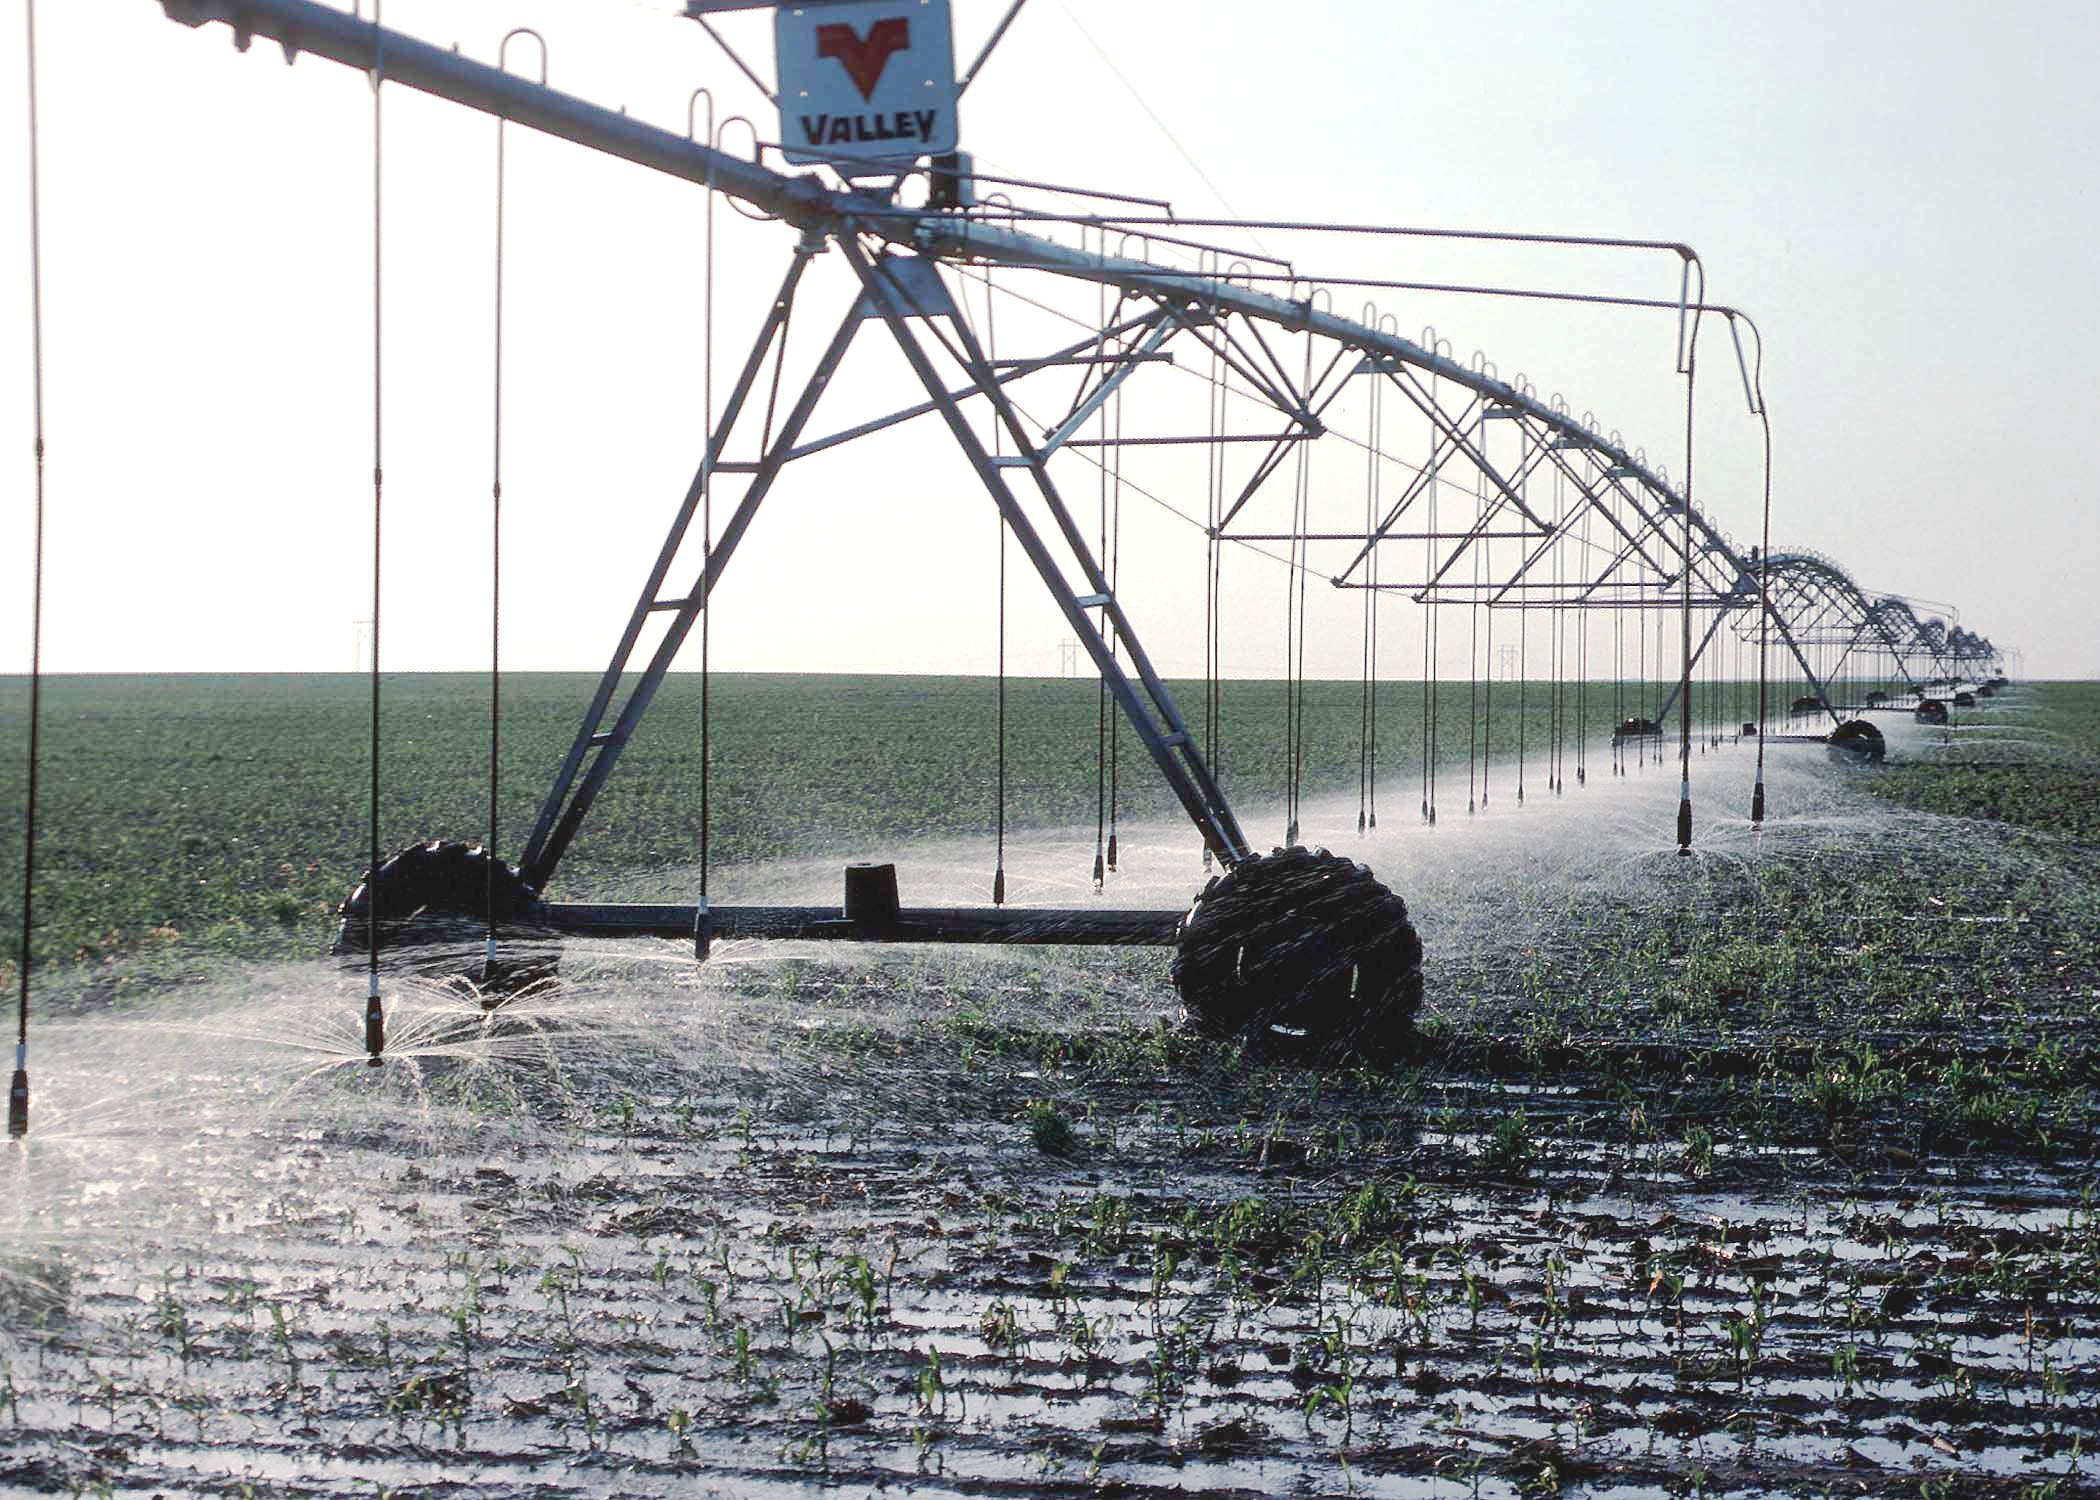 Irrigation system that travels on wheels, showing the emitters low to the ground to minimize evaporation